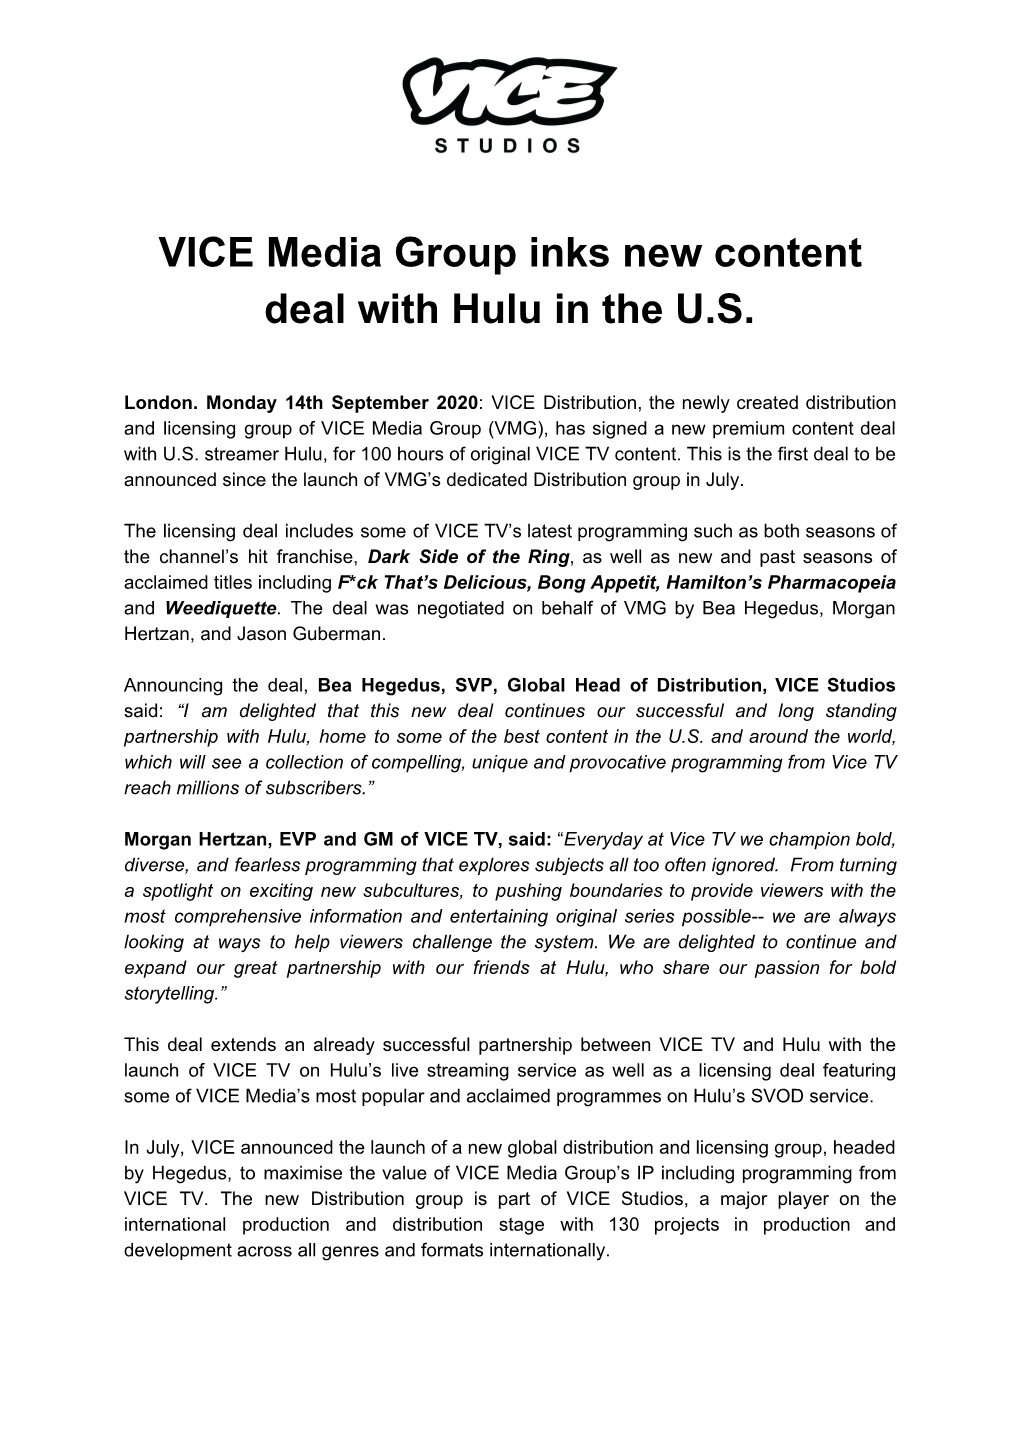 VICE Media Group Inks New Content Deal with Hulu in the U.S